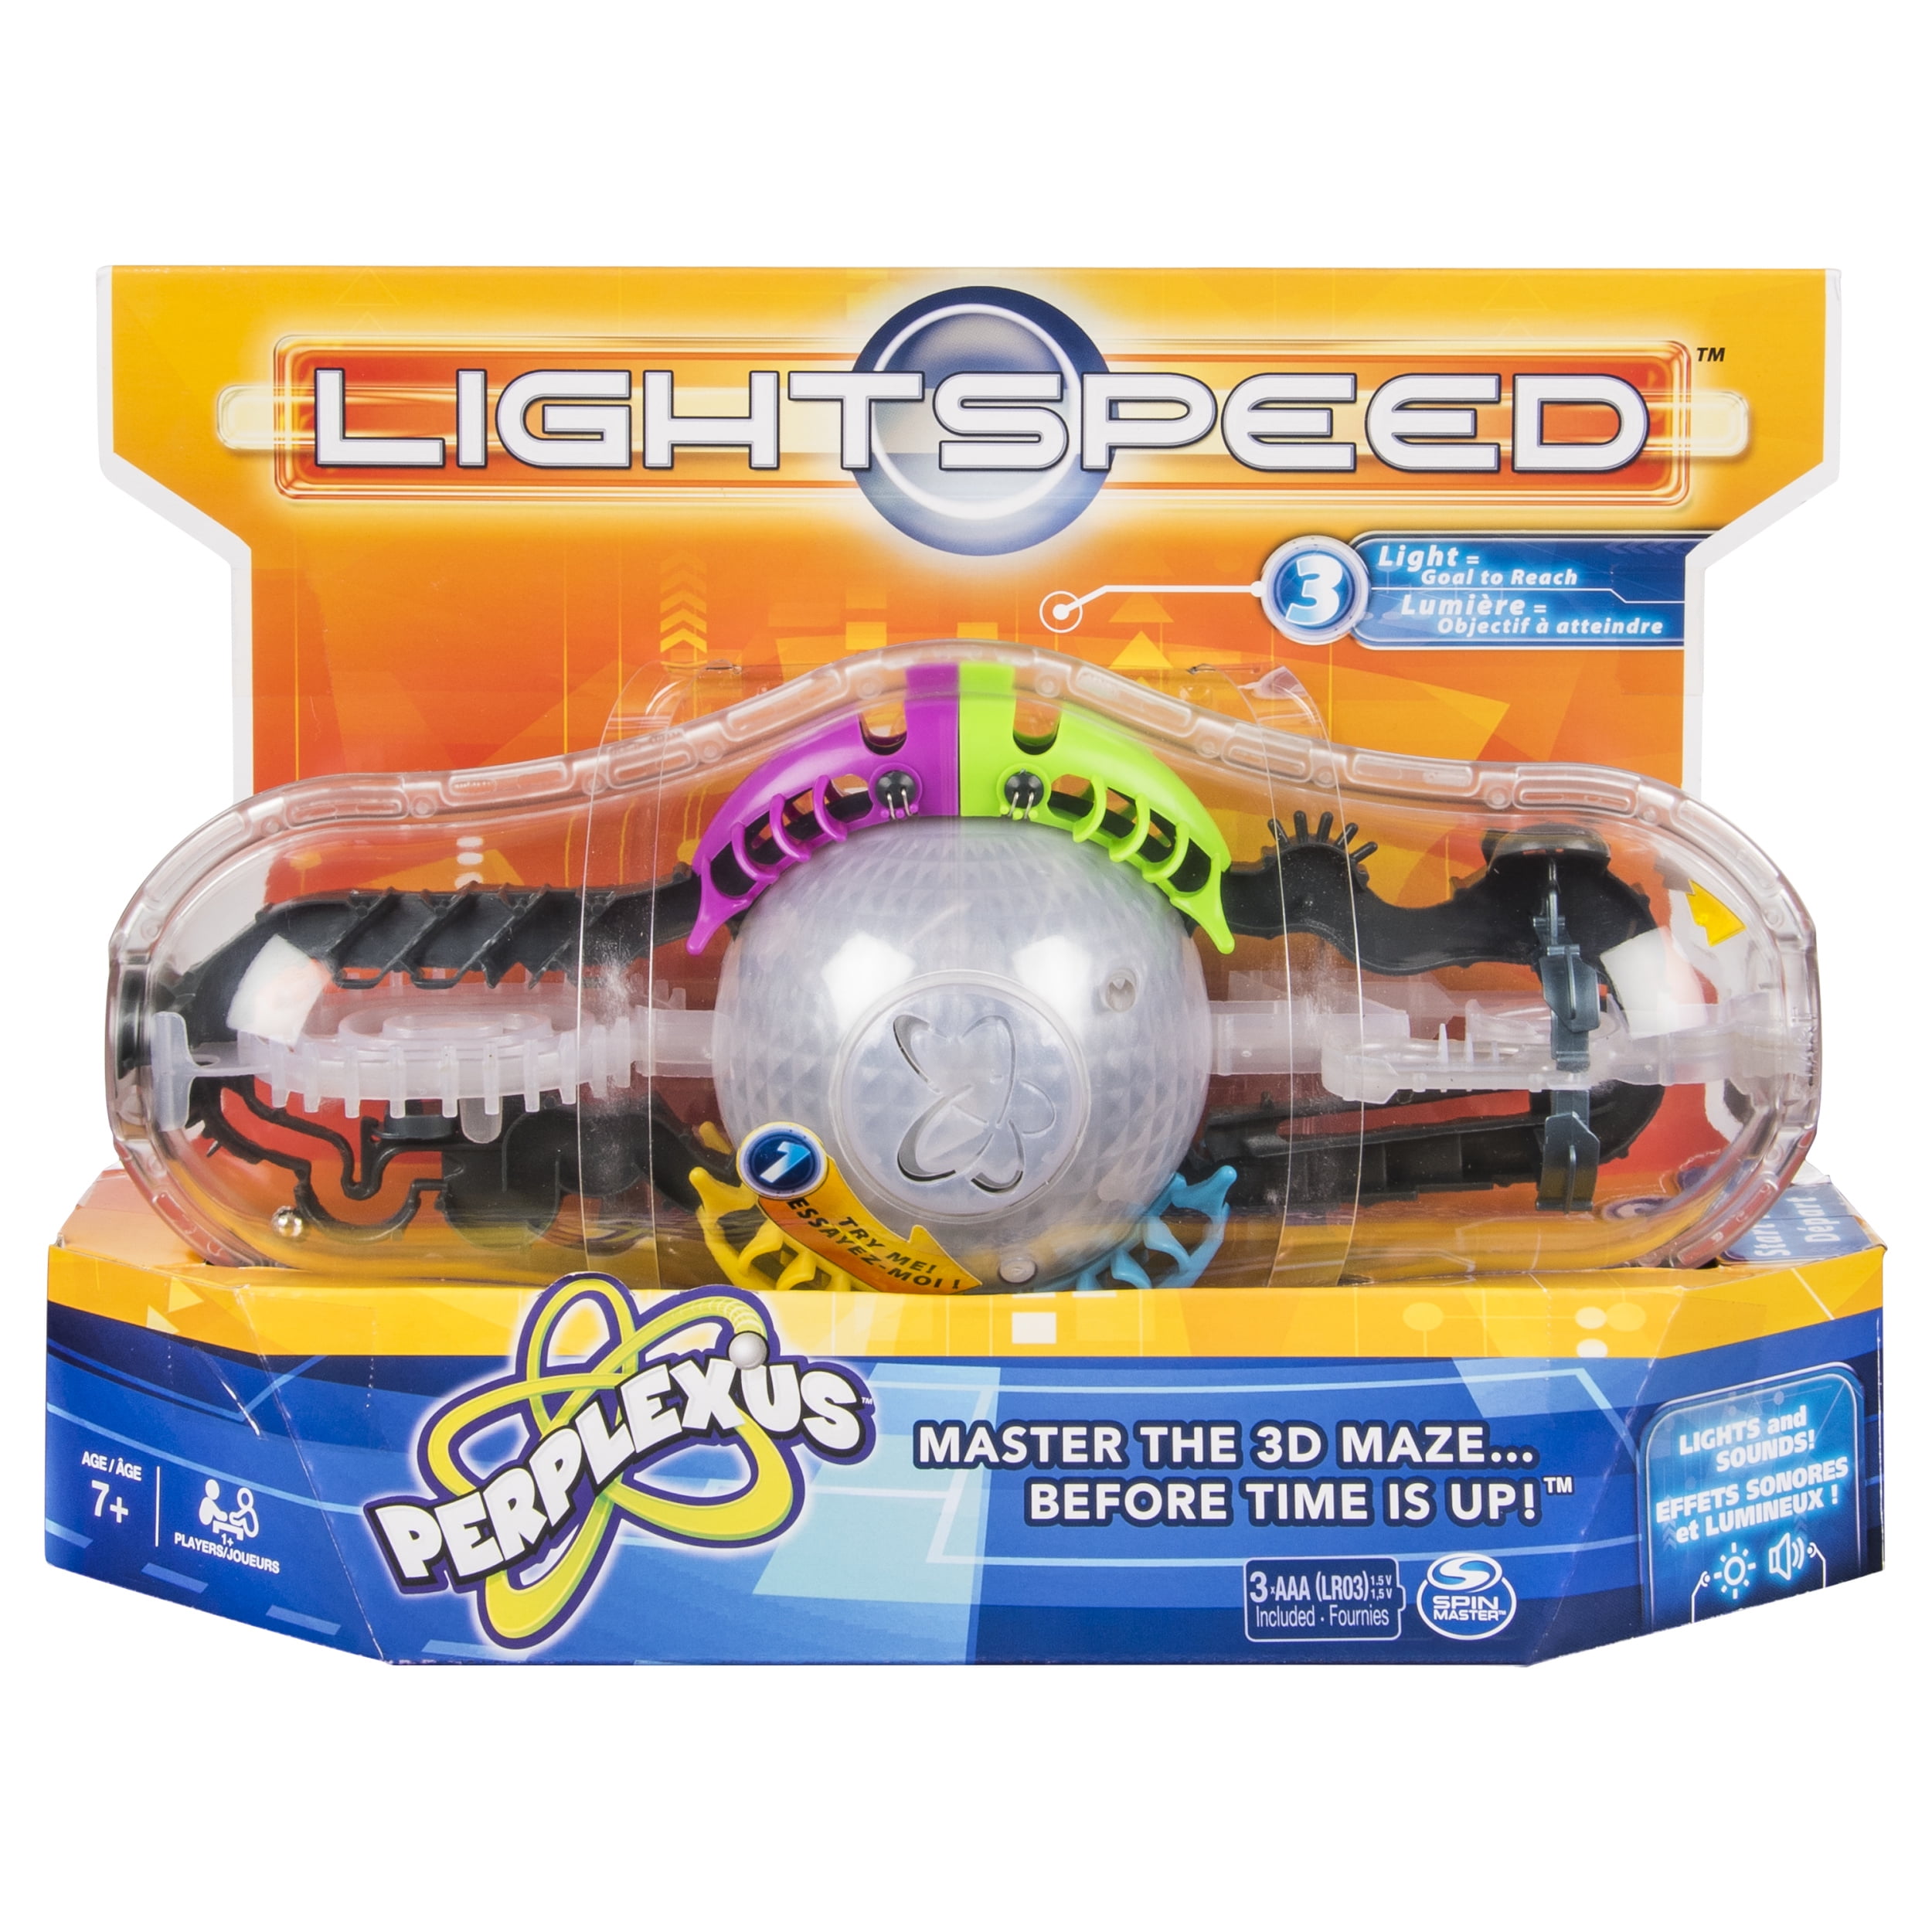 Perplexus Mini Spiral Ages 8 Spinmaster Brain Games 3D Ball Puzzle 